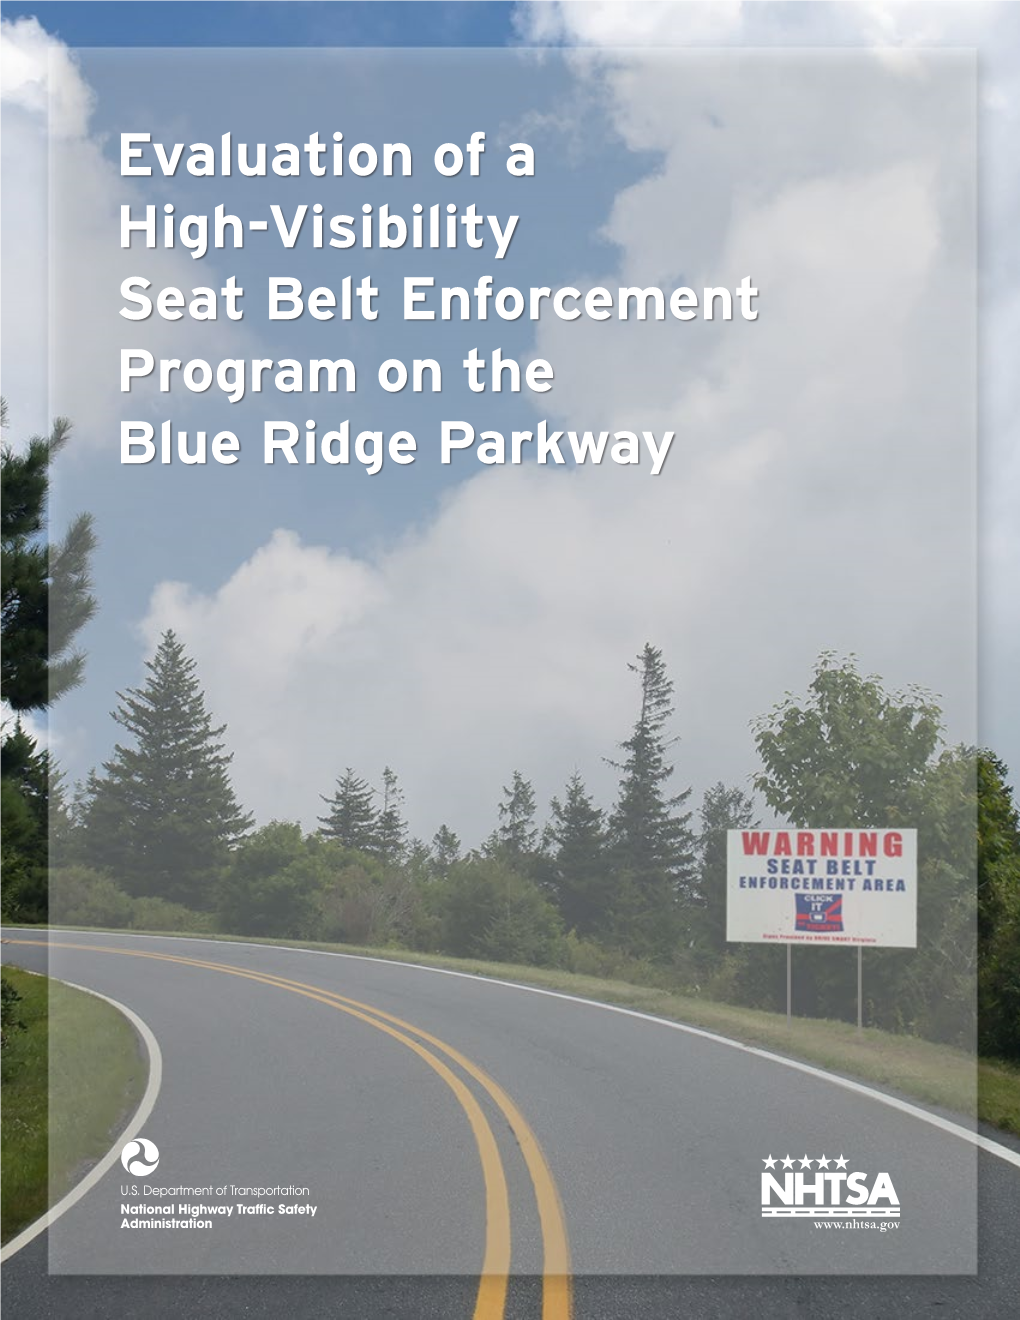 Evaluation of a High-Visibility Seat Belt Enforcement Program on the Blue Ridge Parkway